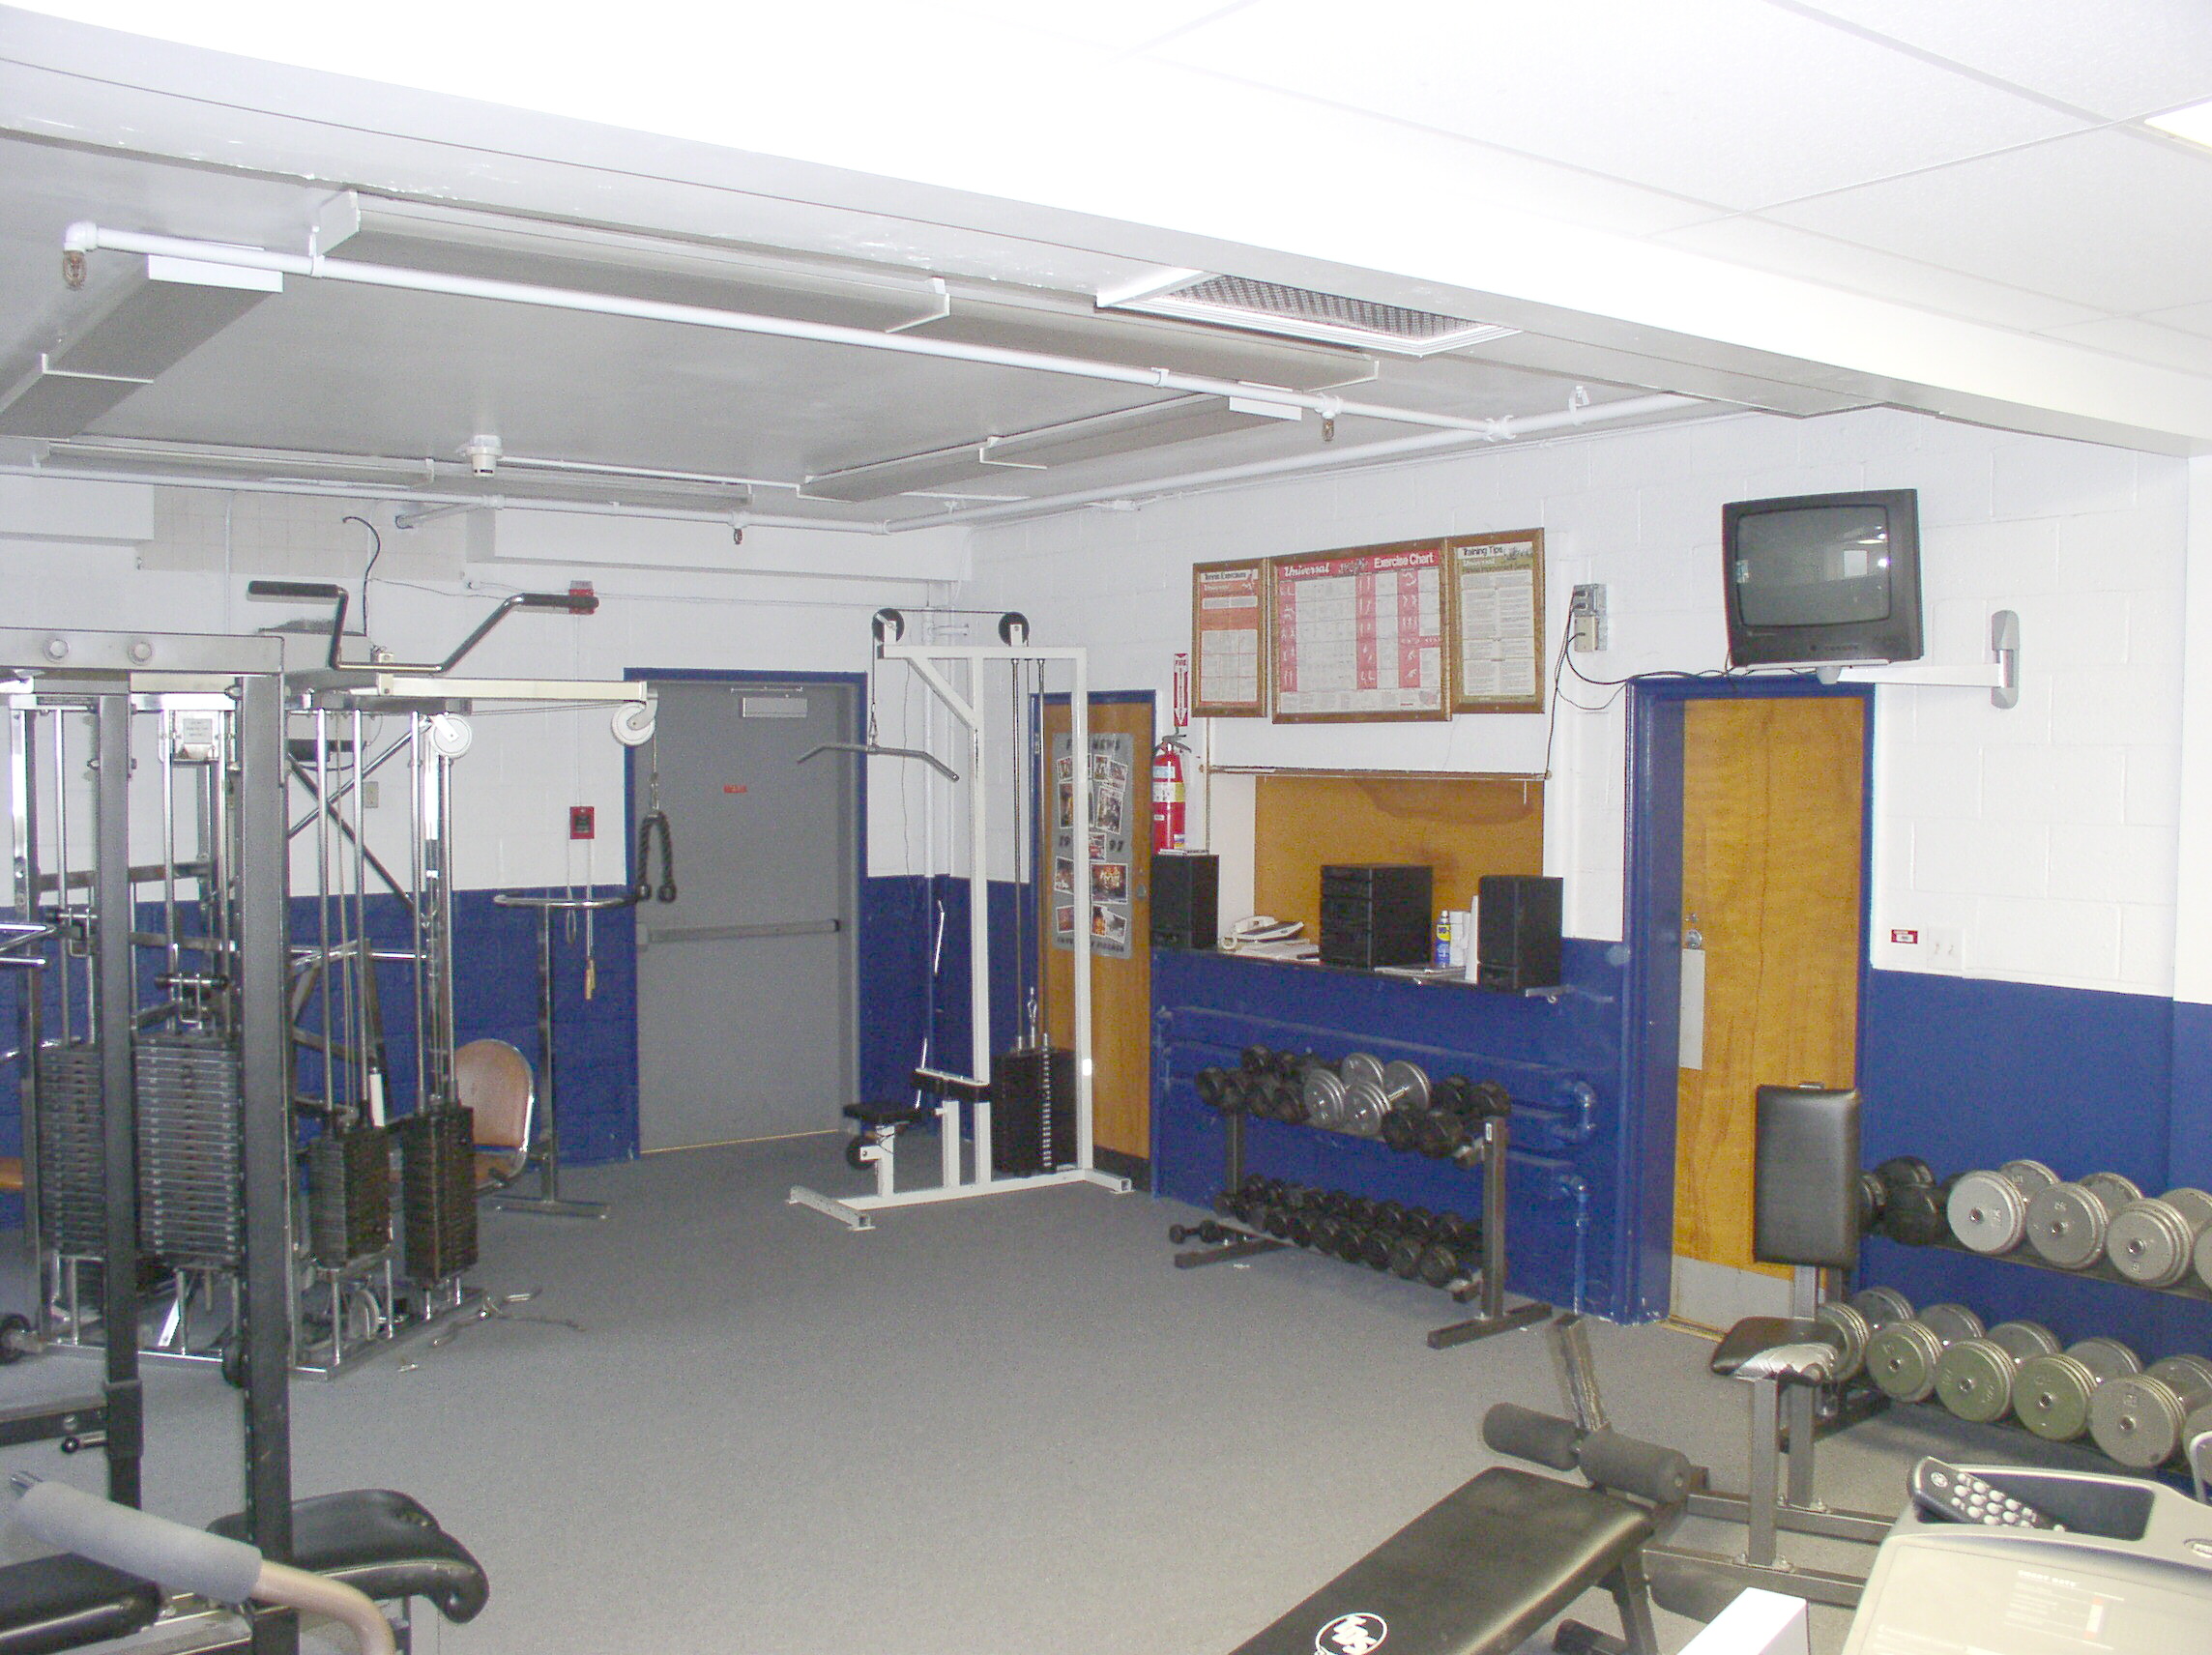 03-12-04  Other - WorkoutRoom